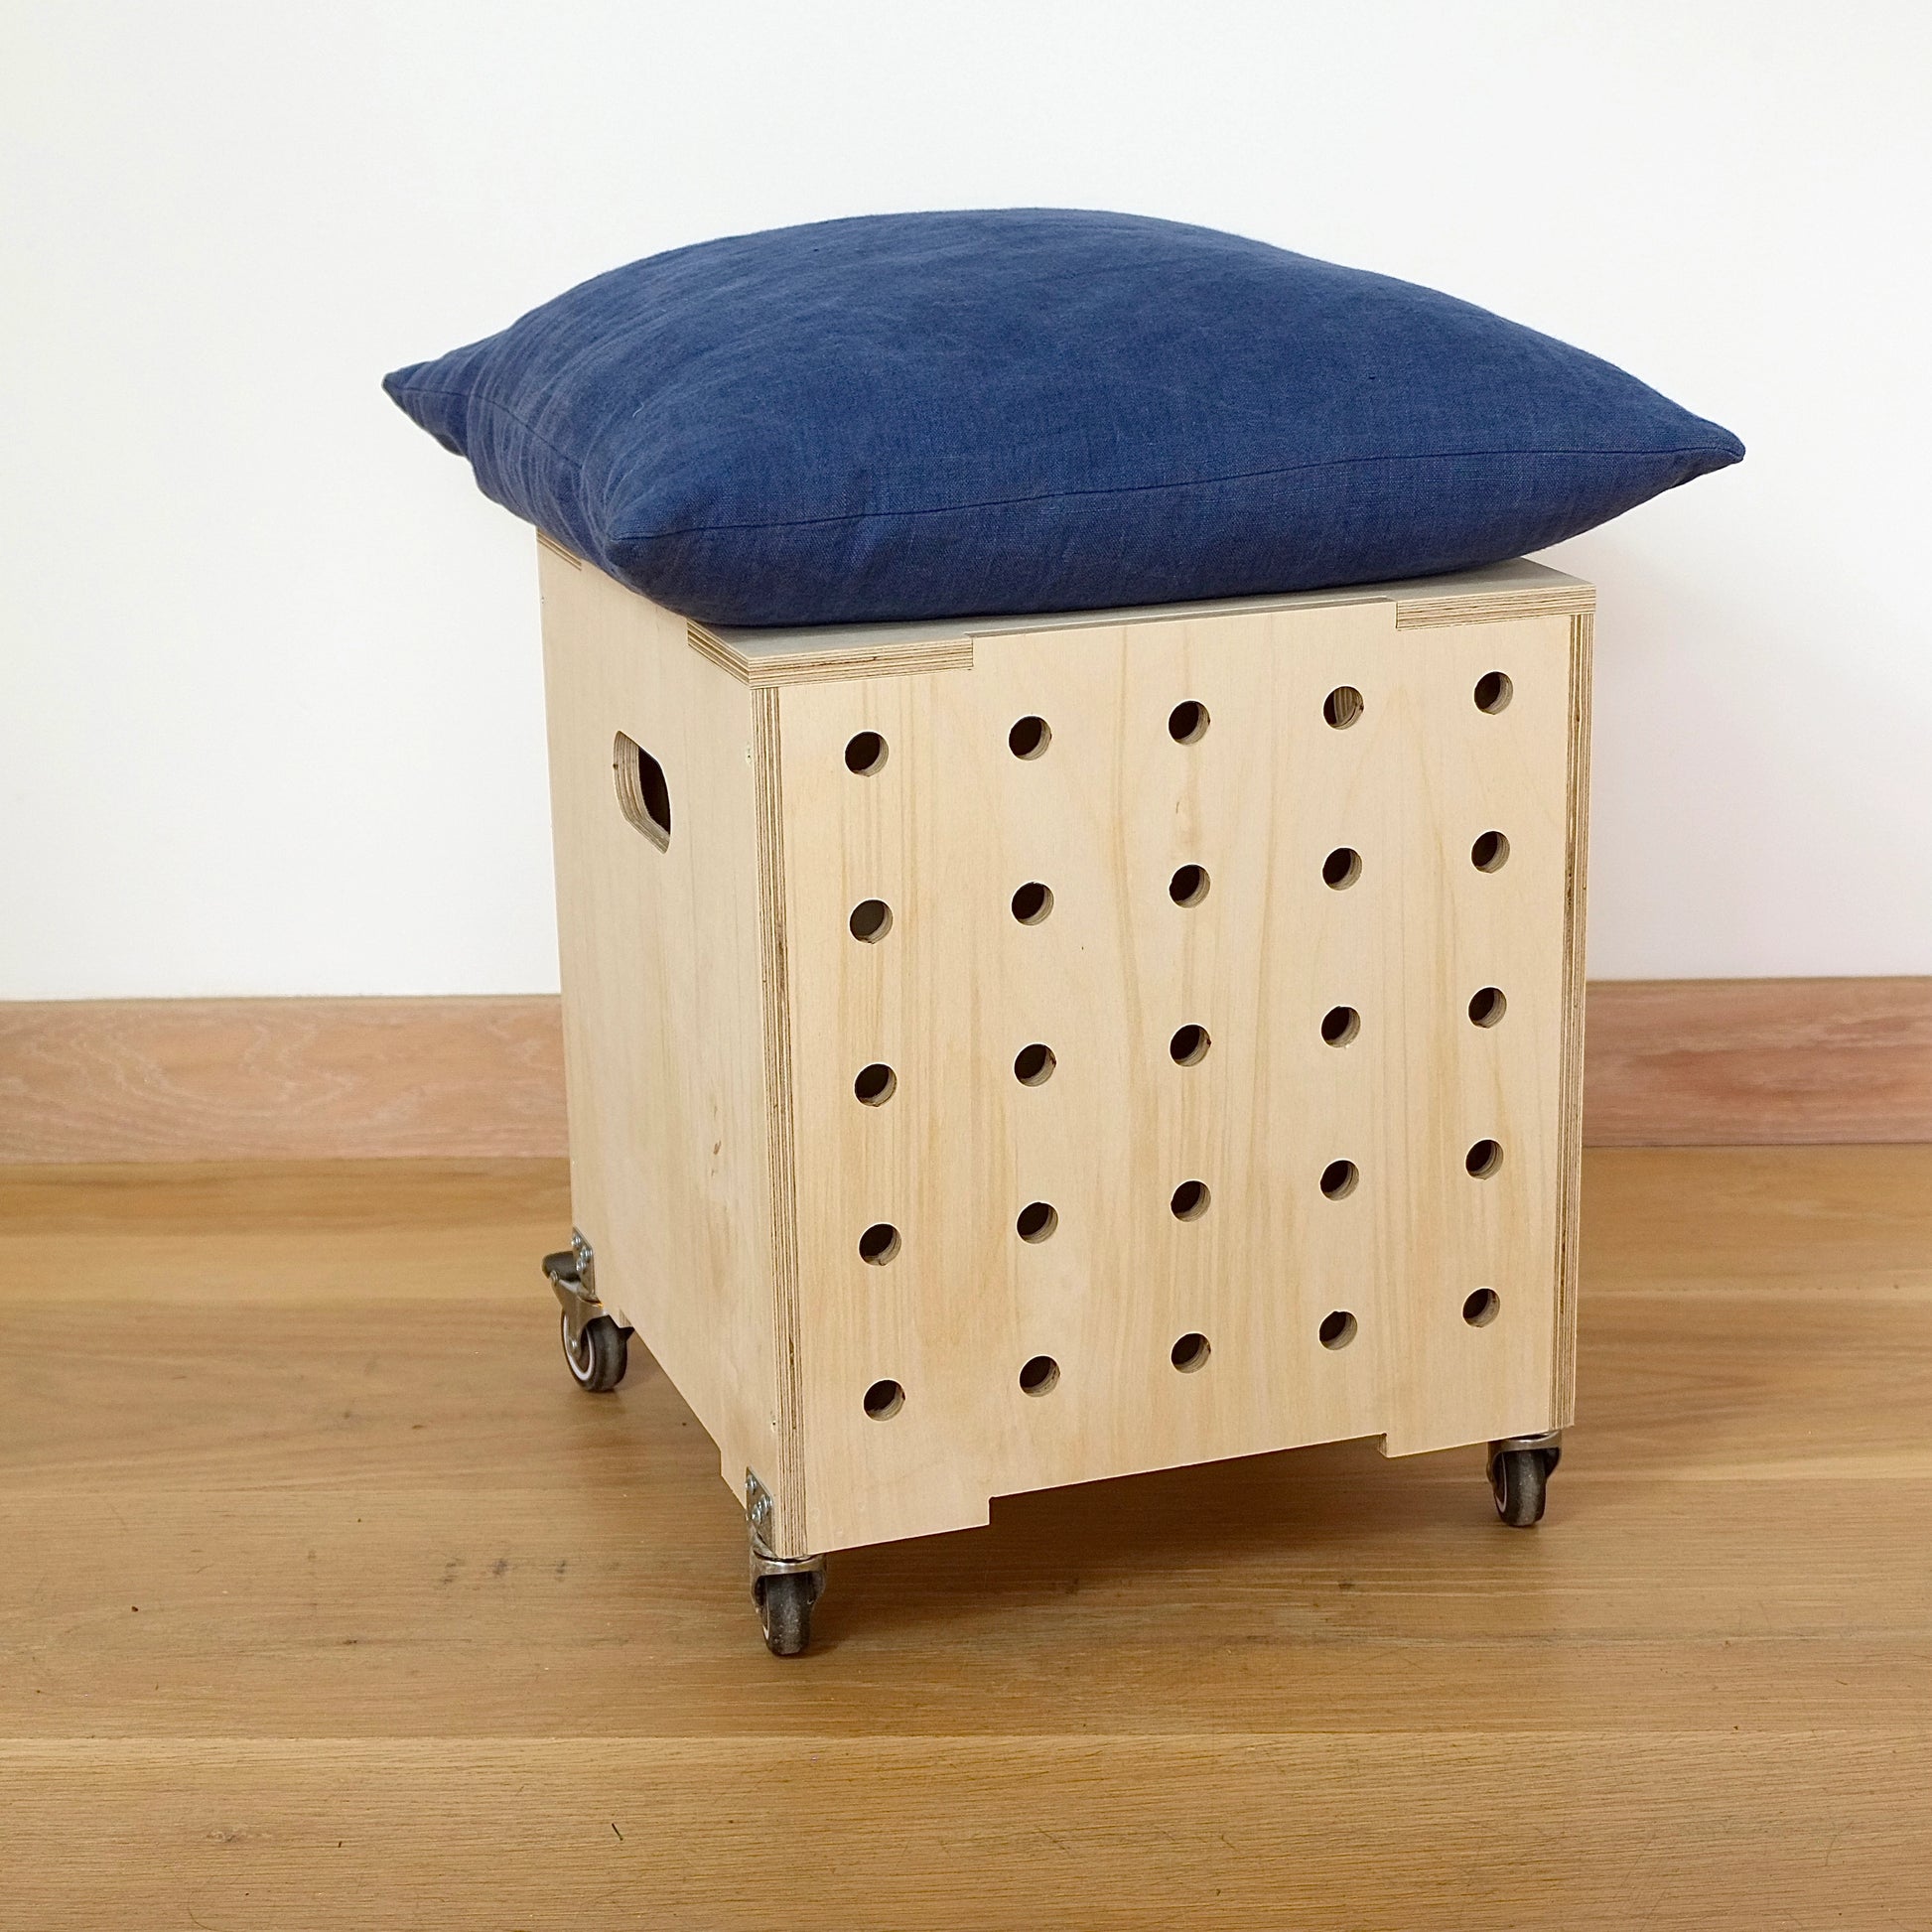 Simple pale wooden square shaped storage crate facing diagonally to right, with five rows of holes cut in front facet, on castors, with a wooden lid with navy cushion on top and sits on a wooden floor.